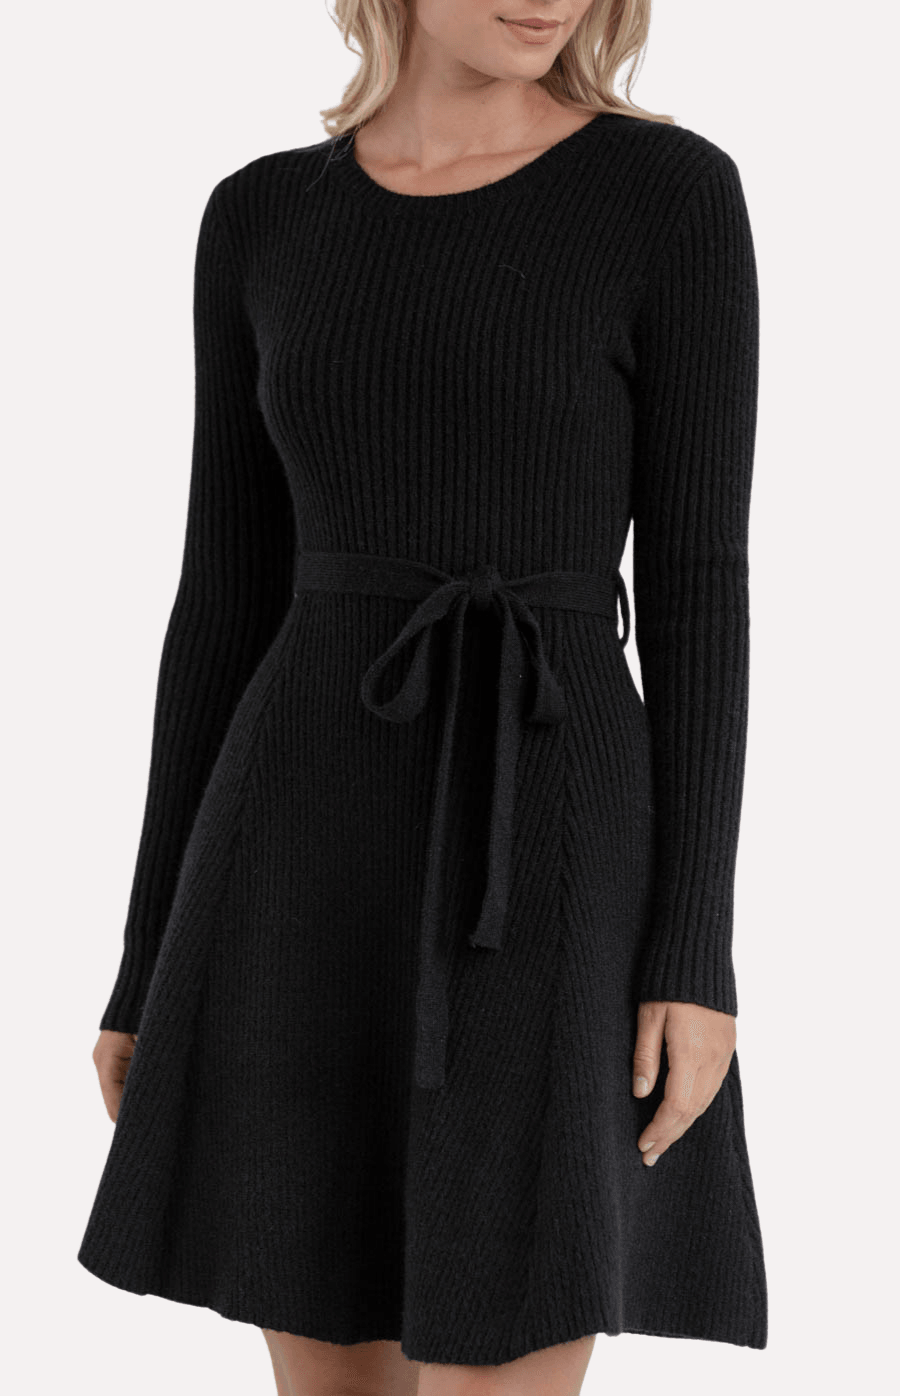 Carter Knitted Dress in Black - Ophelia Fox Boutique